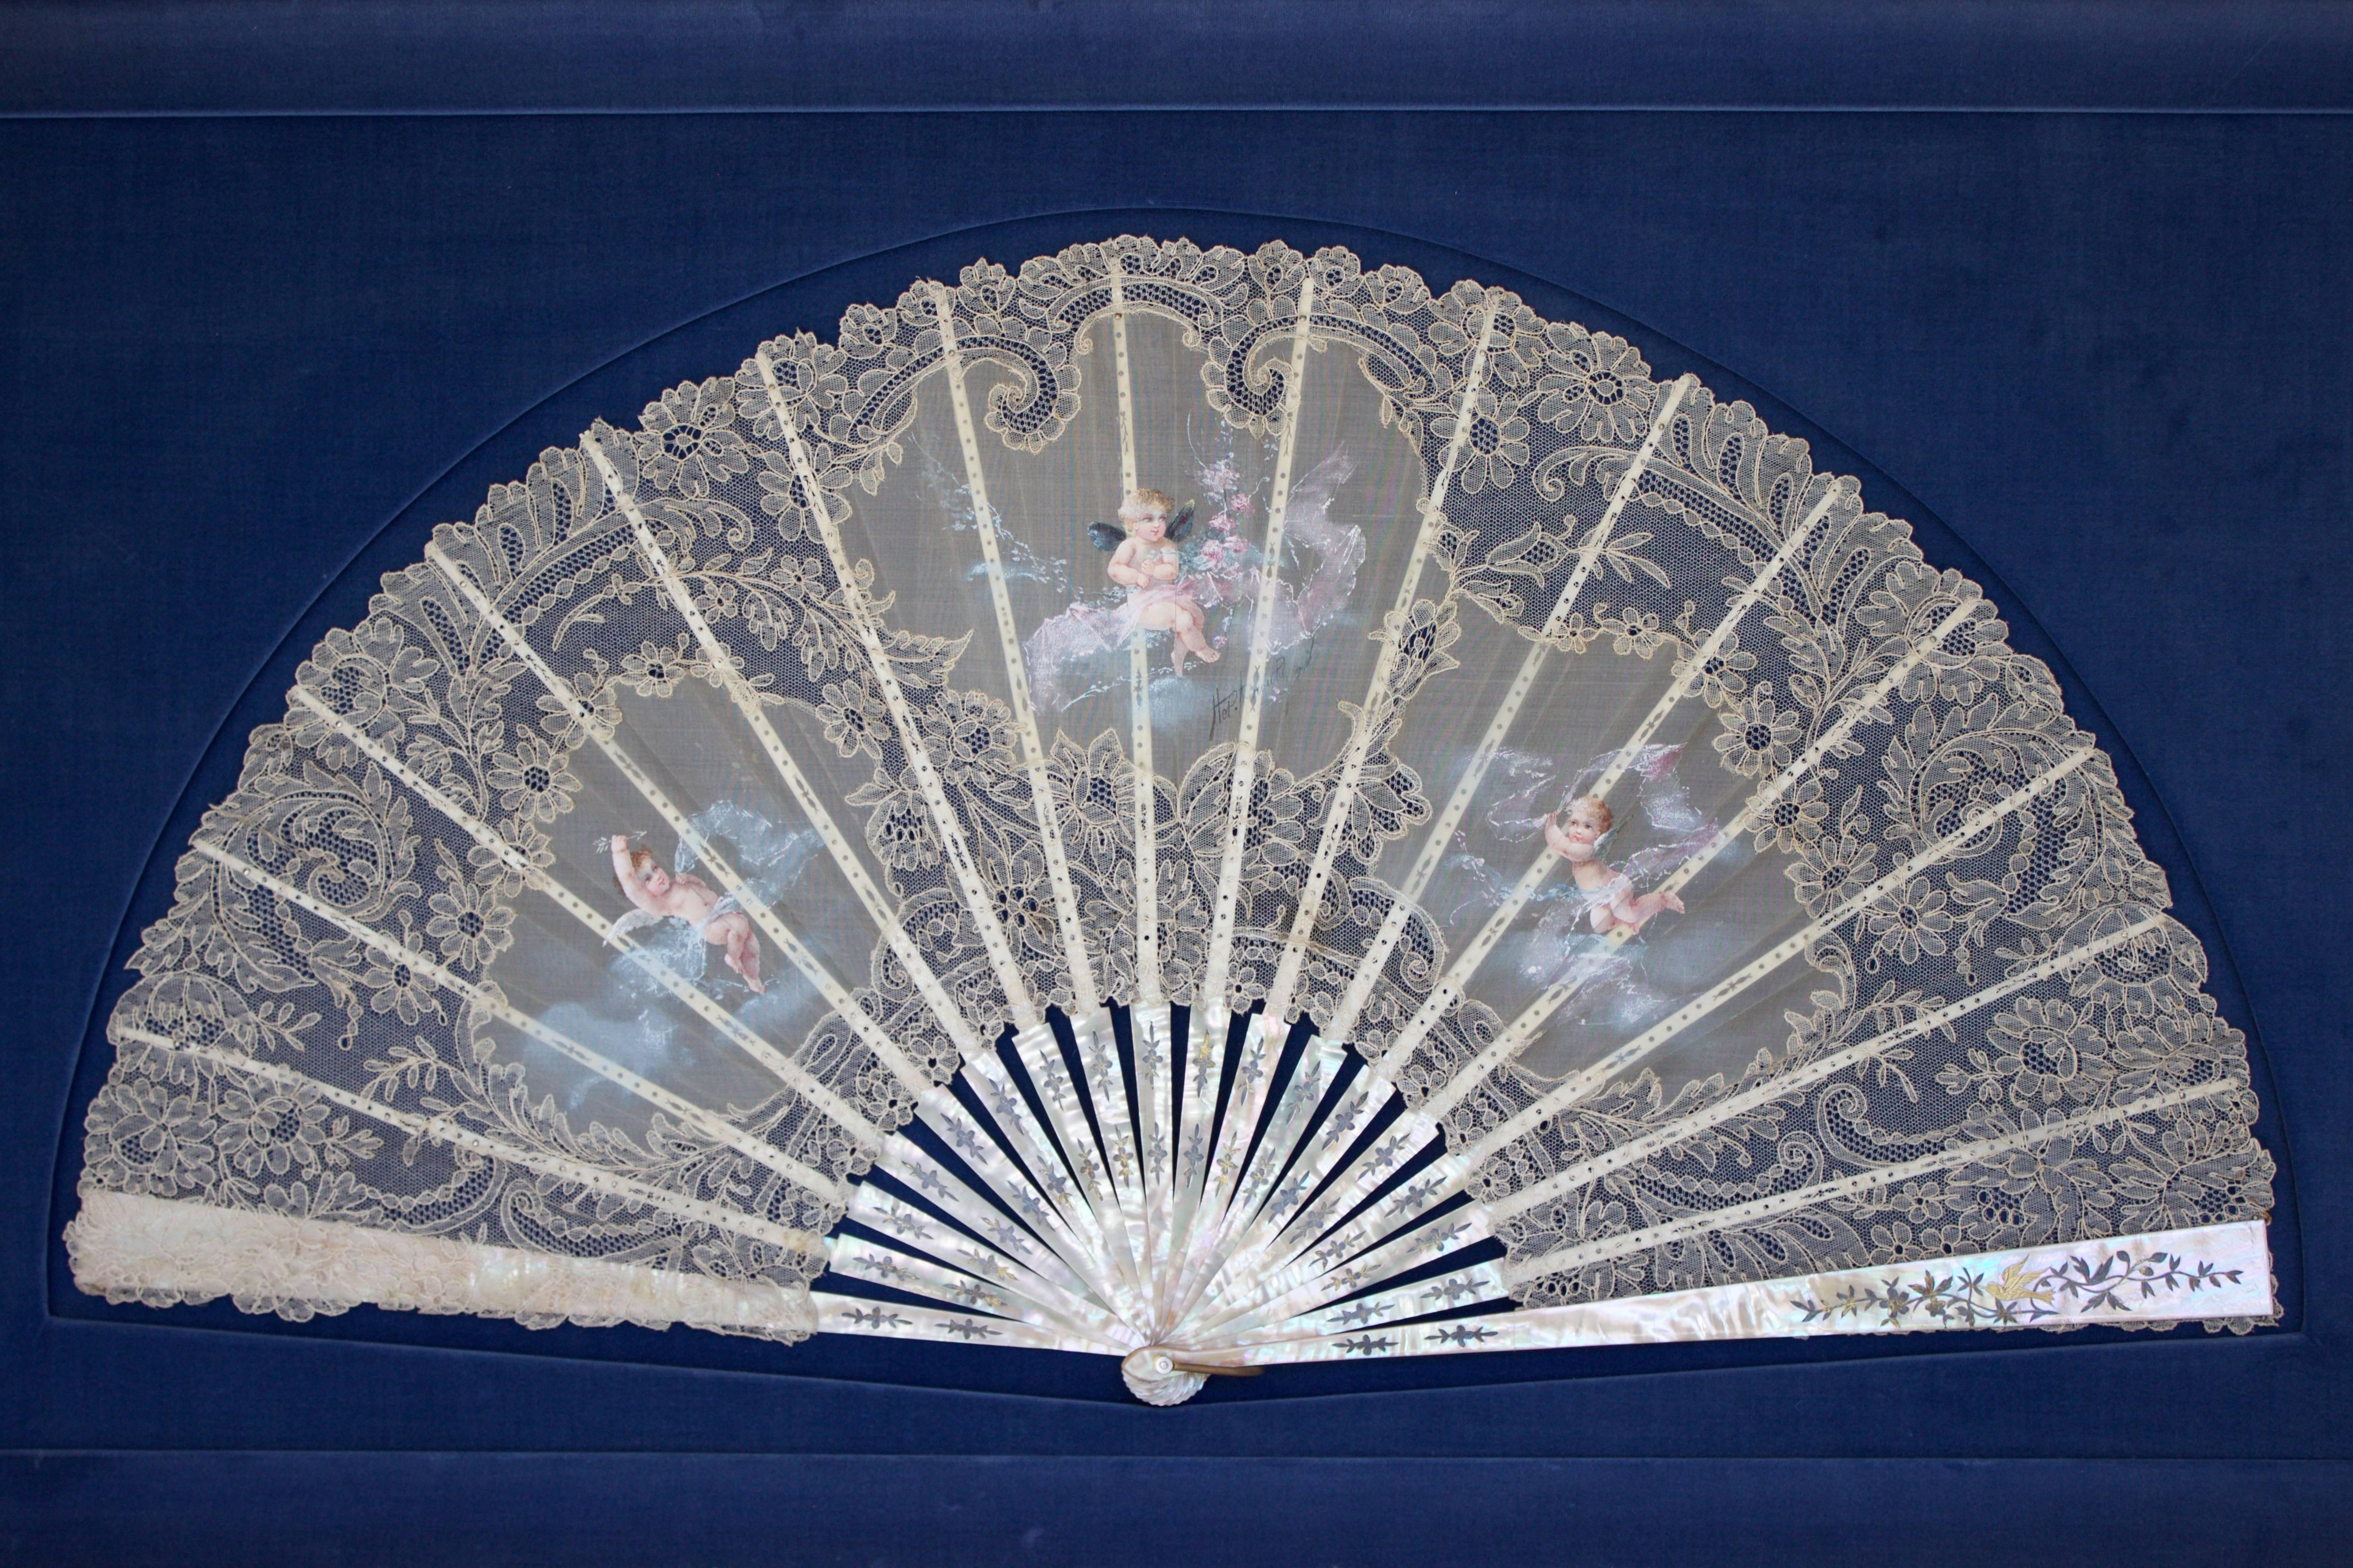 Beautiful hand fan with gorgeous 18 mother-of-pearl supports held together by a brass ring and covered by hand-painted putti on the lace. Mounted on a high quality fabric covered support and framed with a glass front.